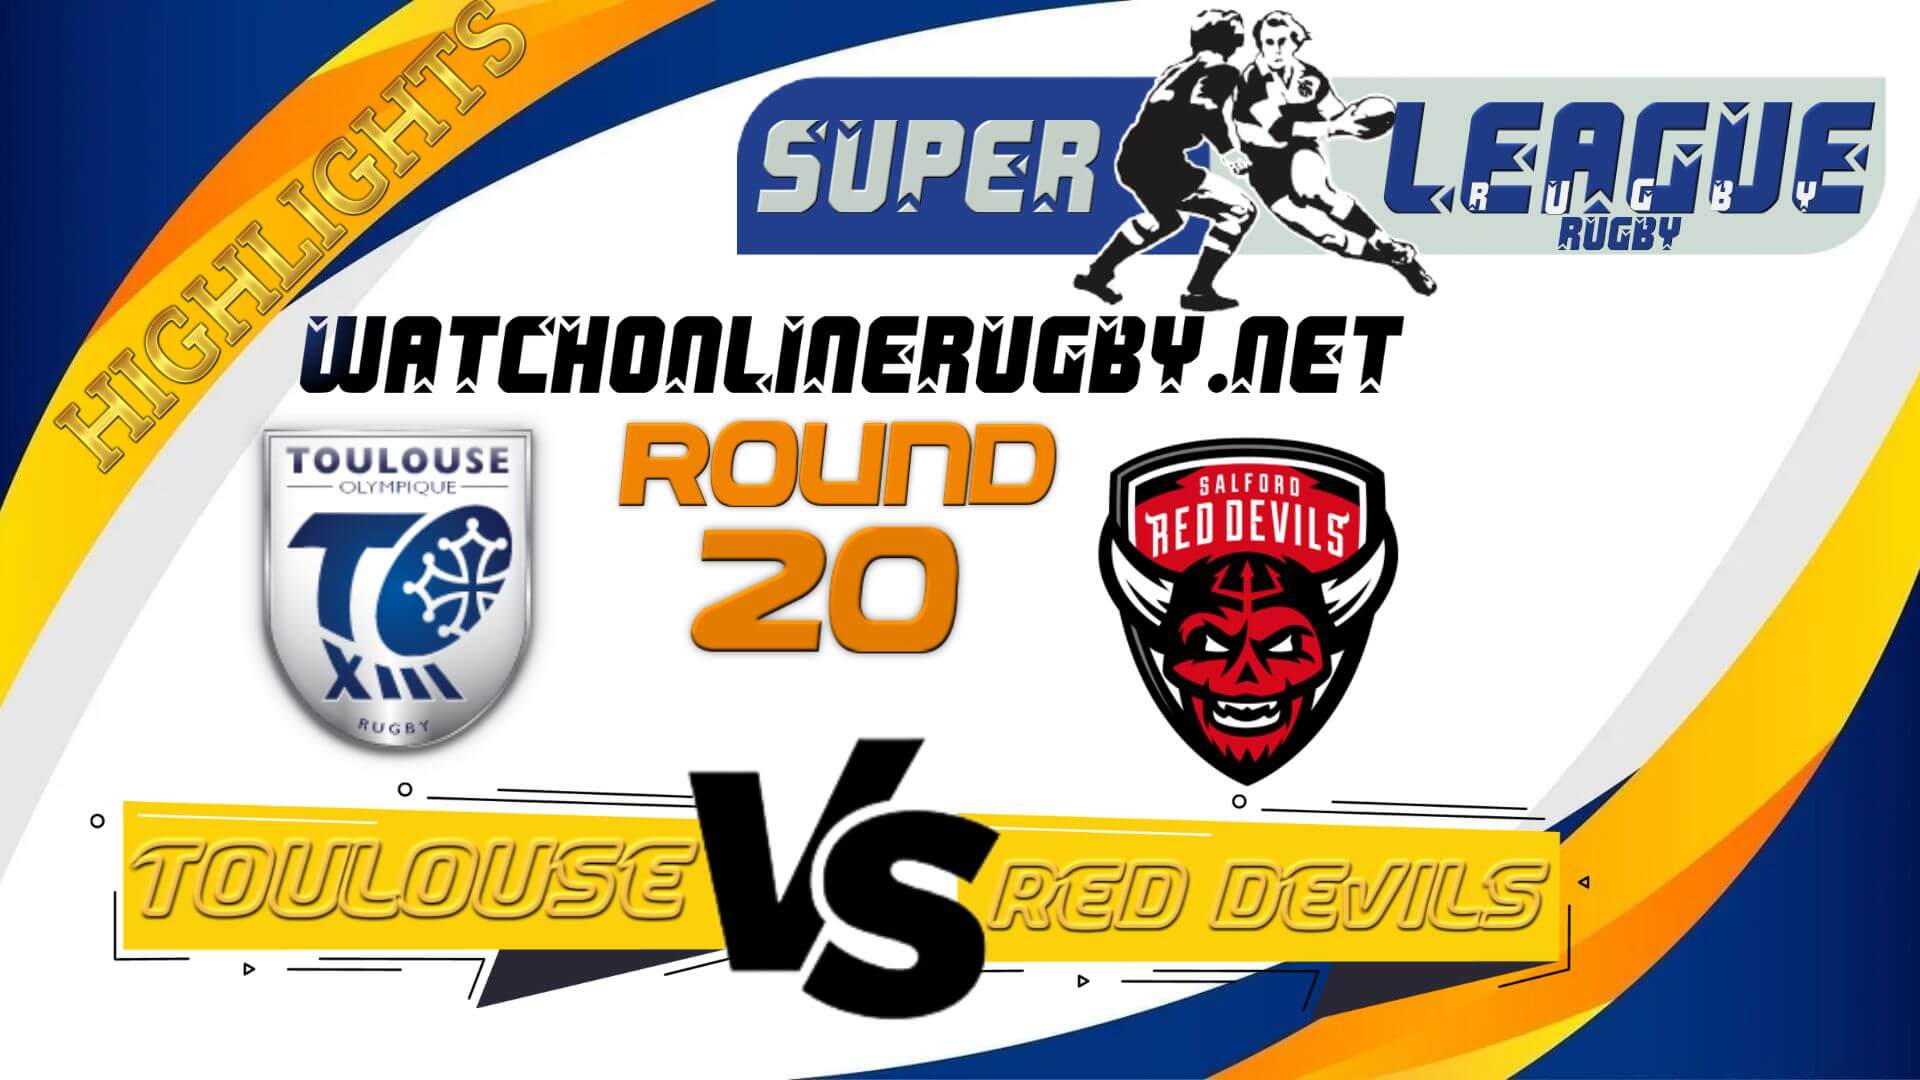 Toulouse Vs Salford Red Devils Super League Rugby 2022 RD 20